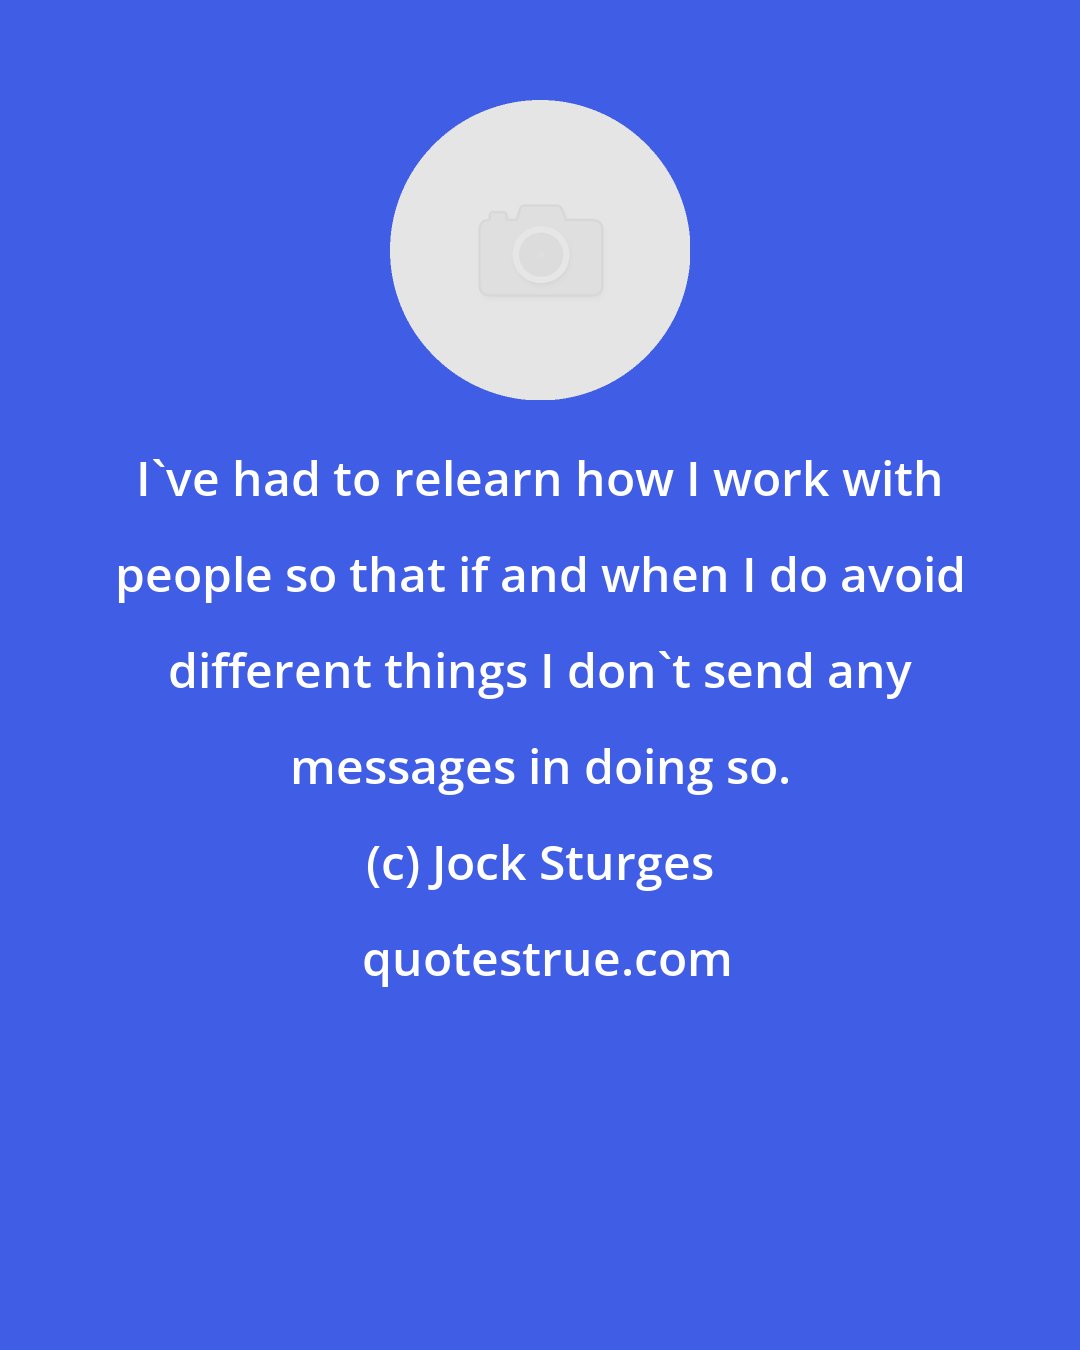 Jock Sturges: I've had to relearn how I work with people so that if and when I do avoid different things I don't send any messages in doing so.